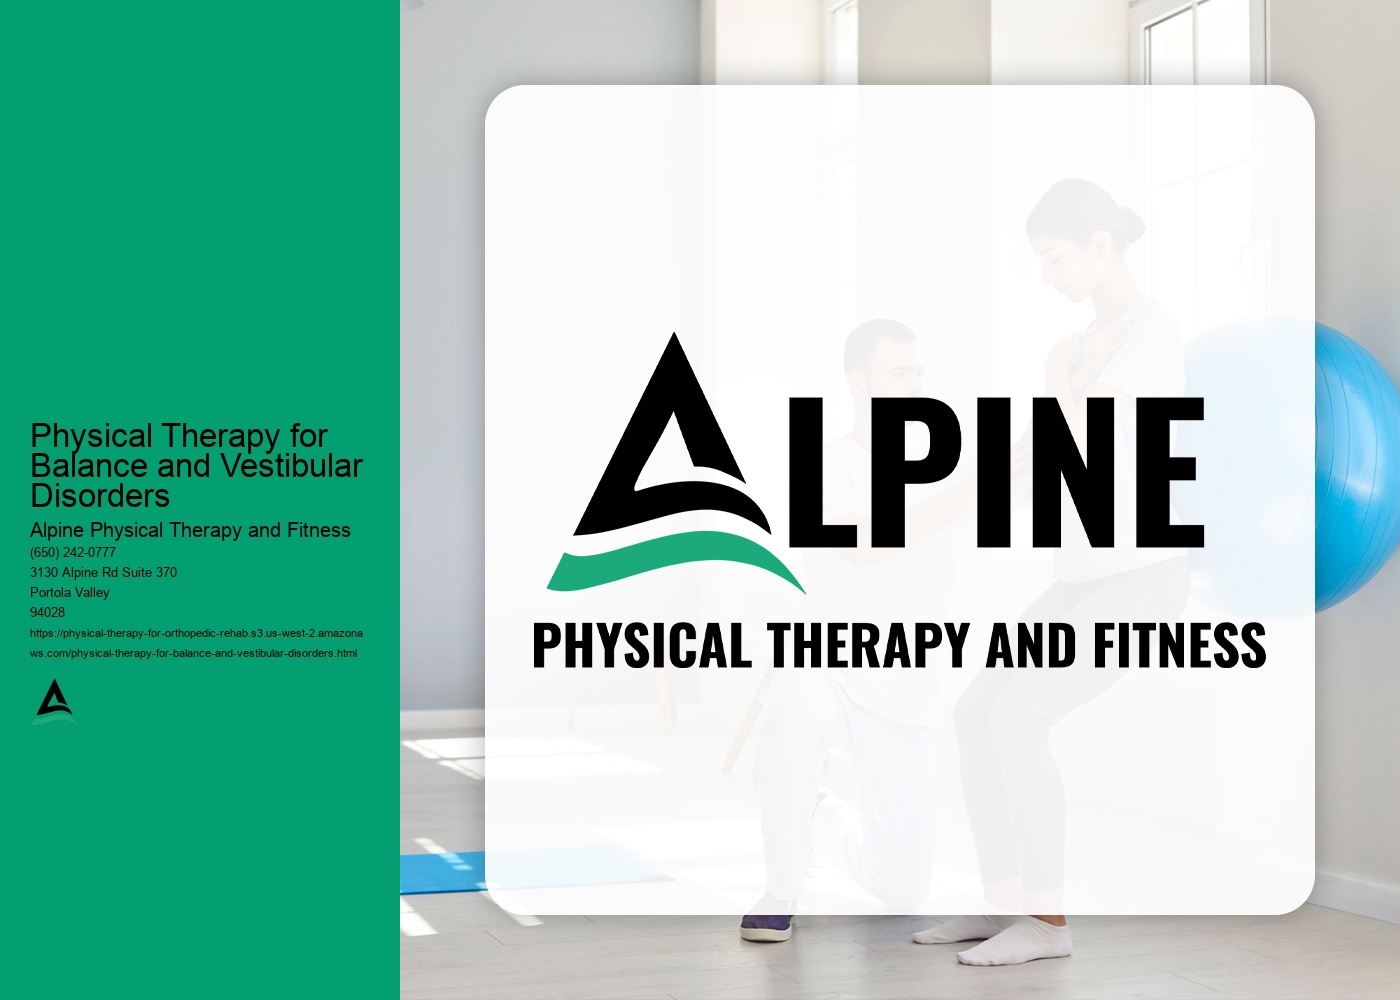 What are some specific exercises or techniques used in physical therapy for balance and vestibular disorders?